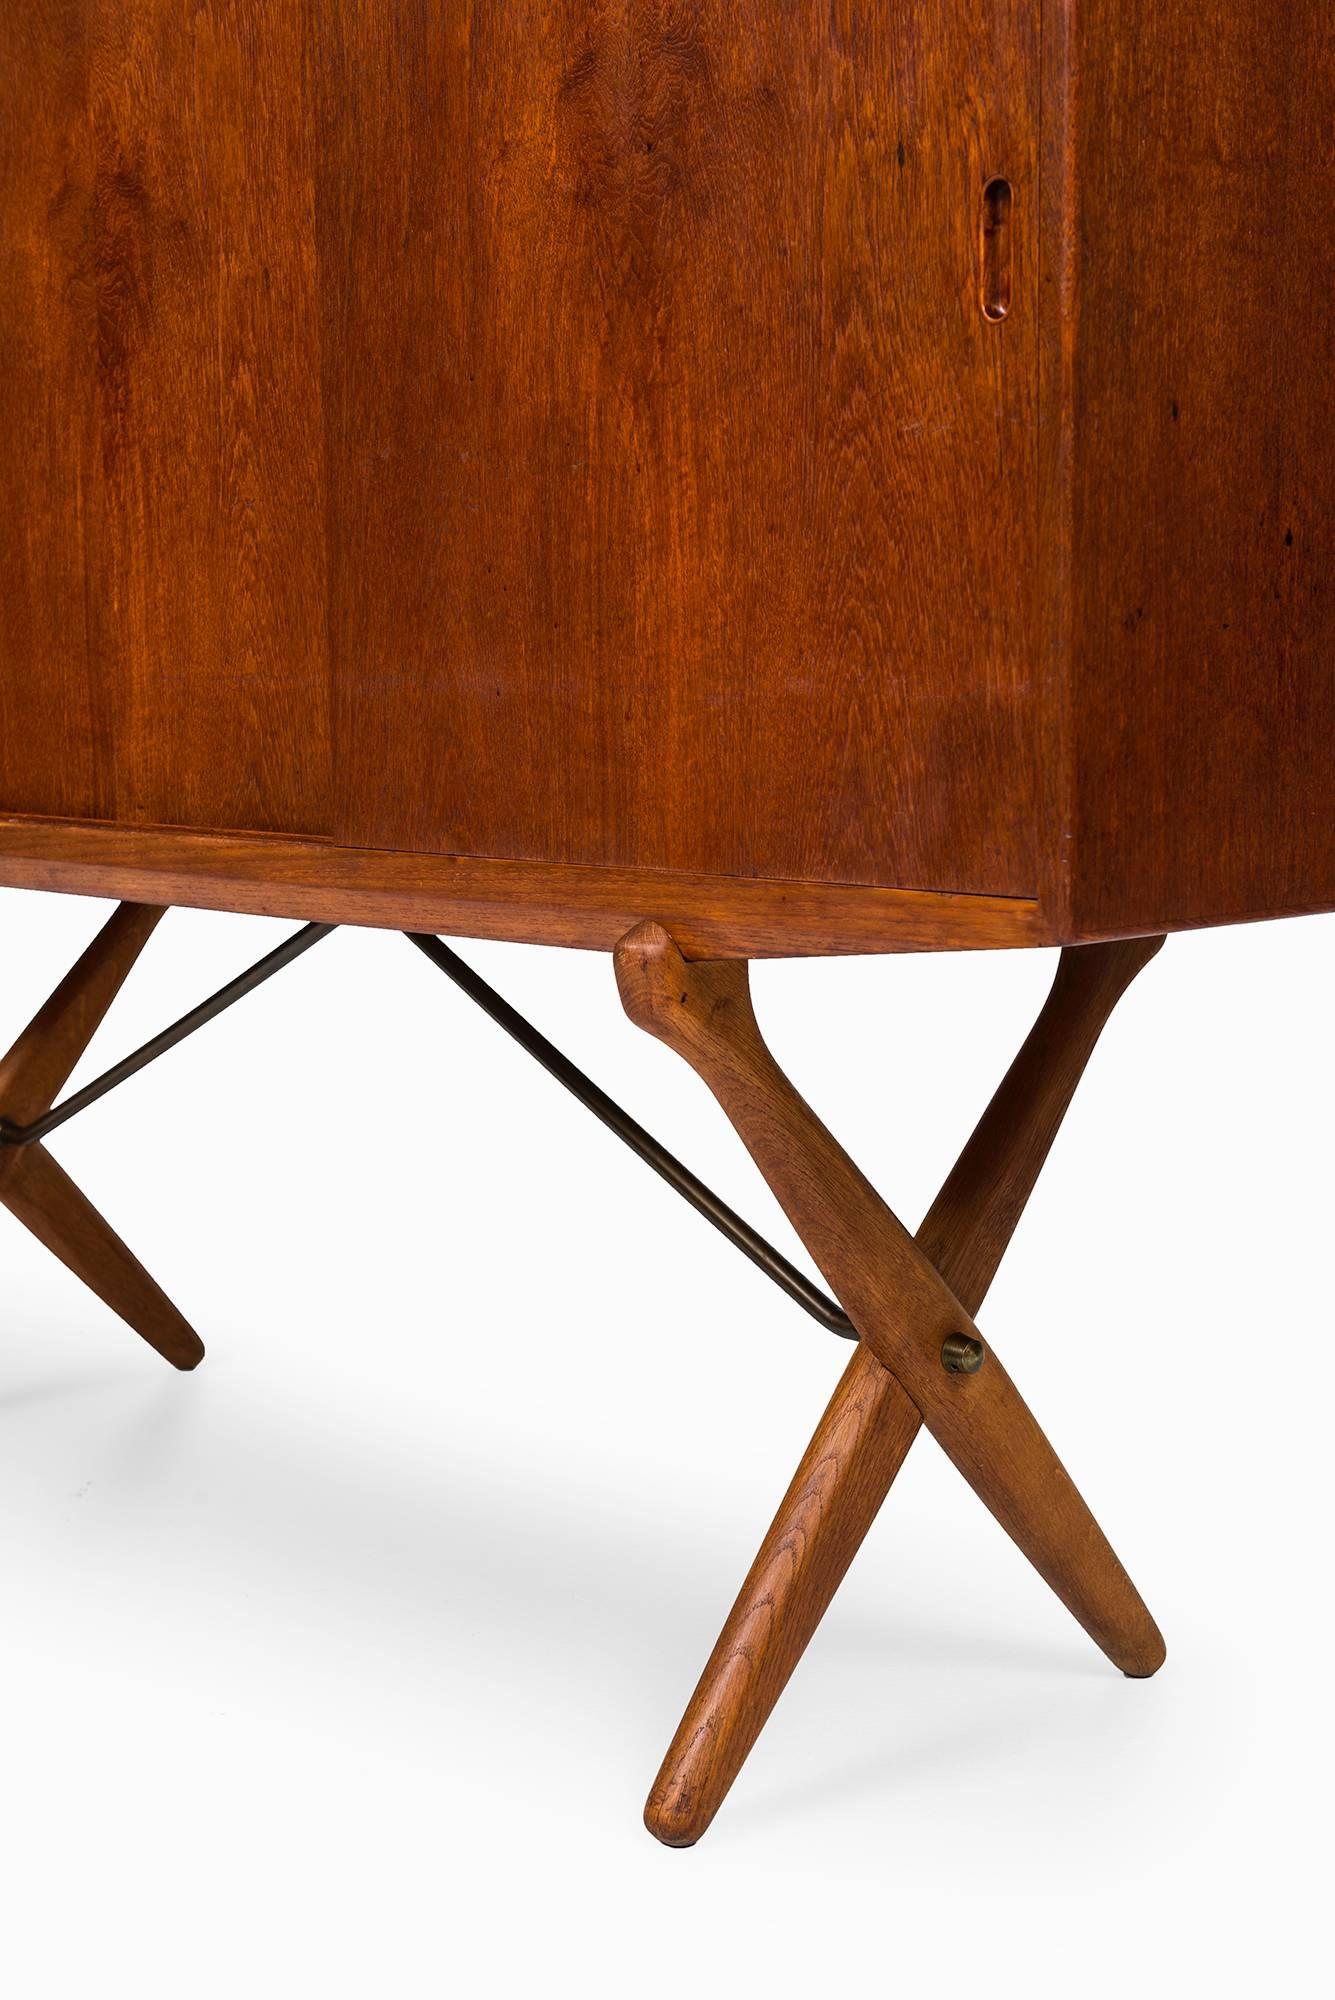 Scandinavian Modern Rare Sideboard Designed by Hans Wegner and Produced by Andreas Tuck in Denmark